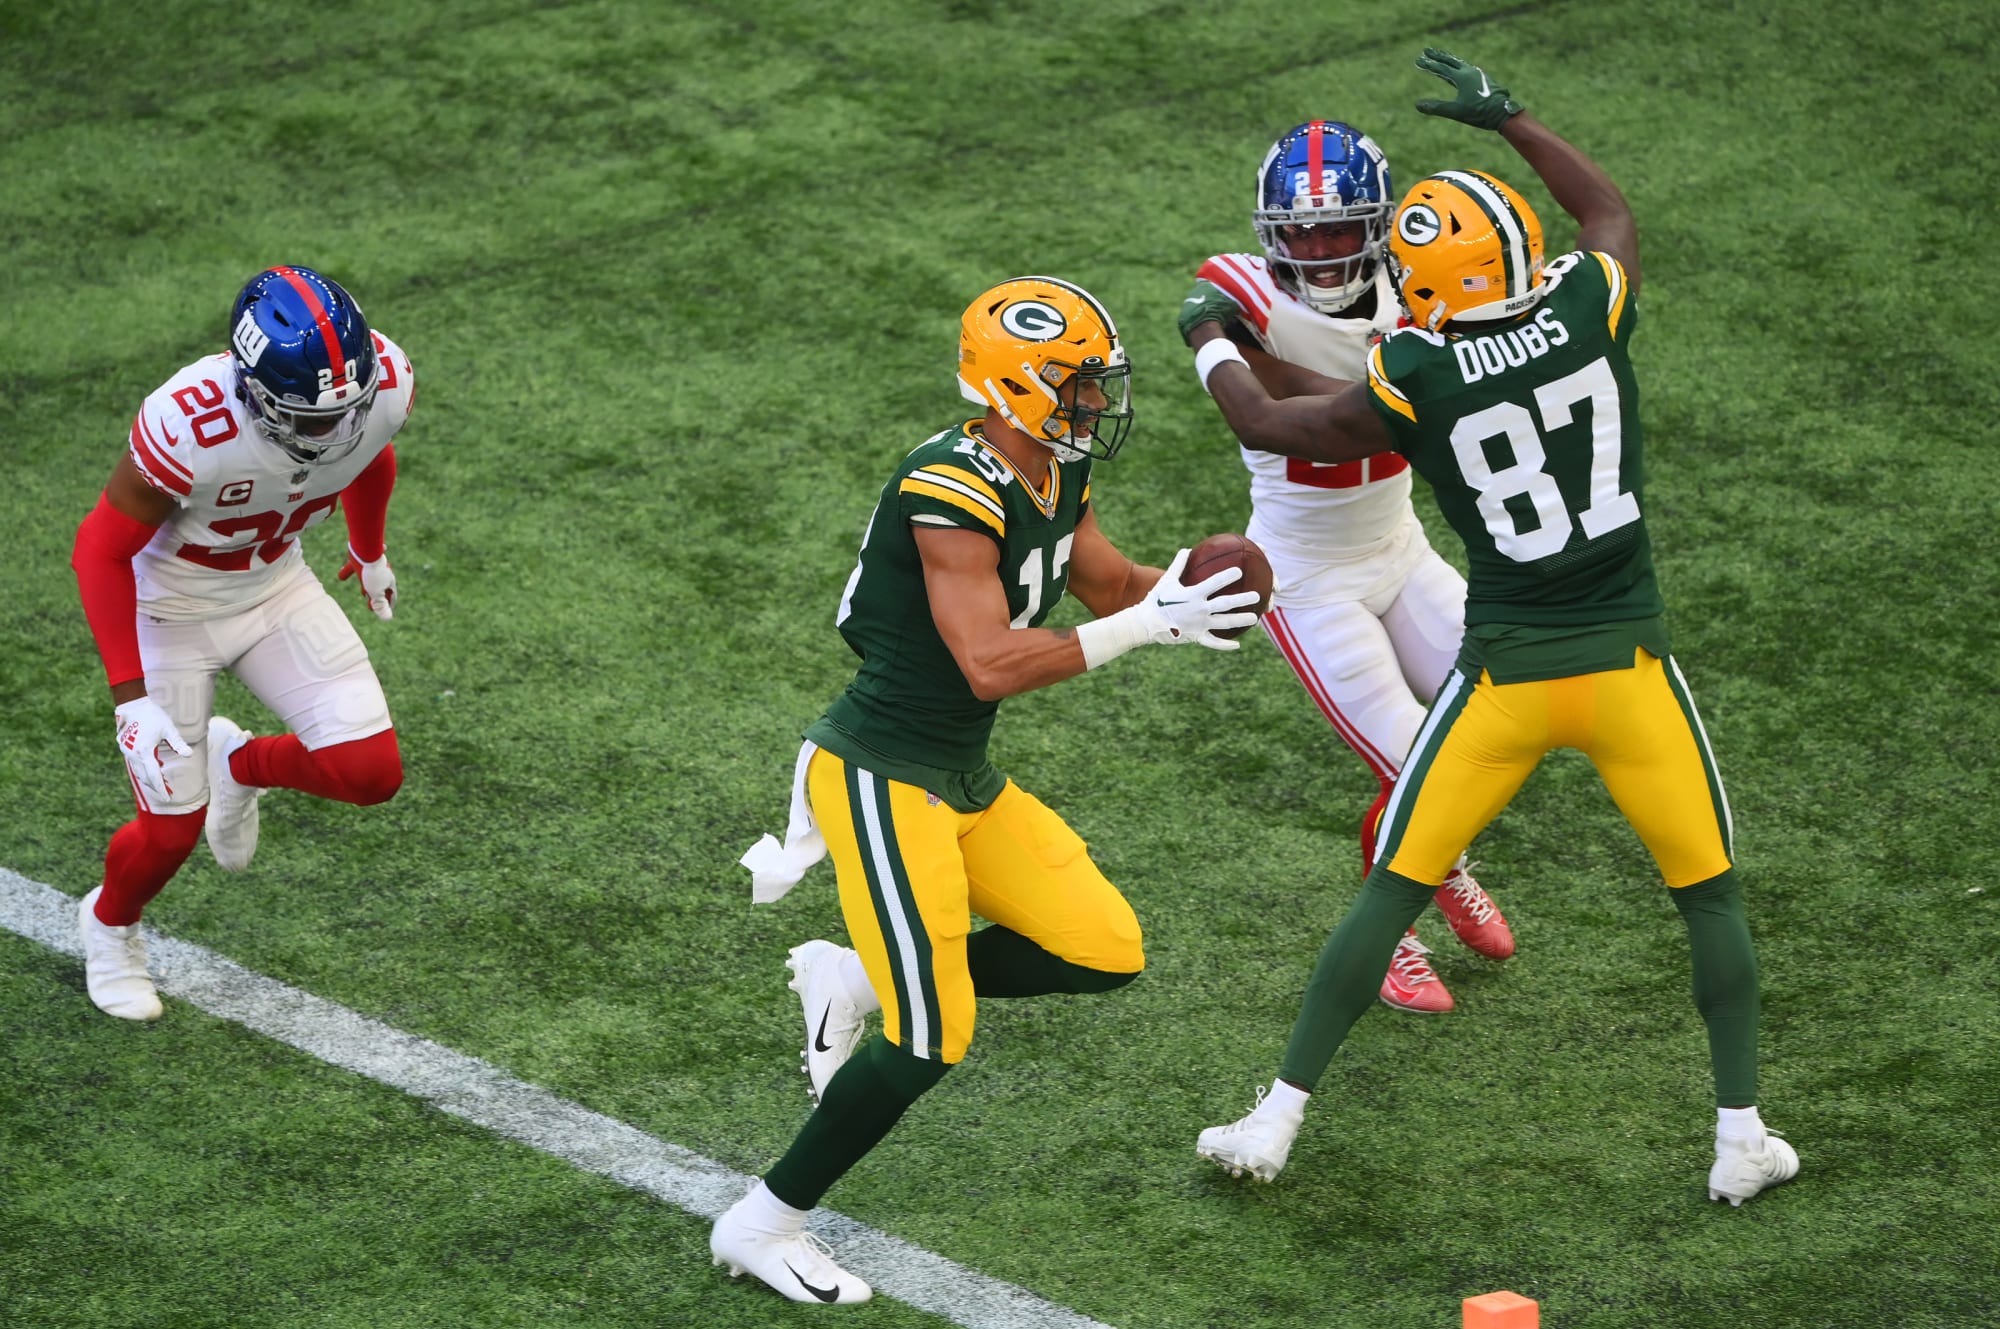 Refs gift the Packers a TD vs. Giants with embarrassing pass interference call